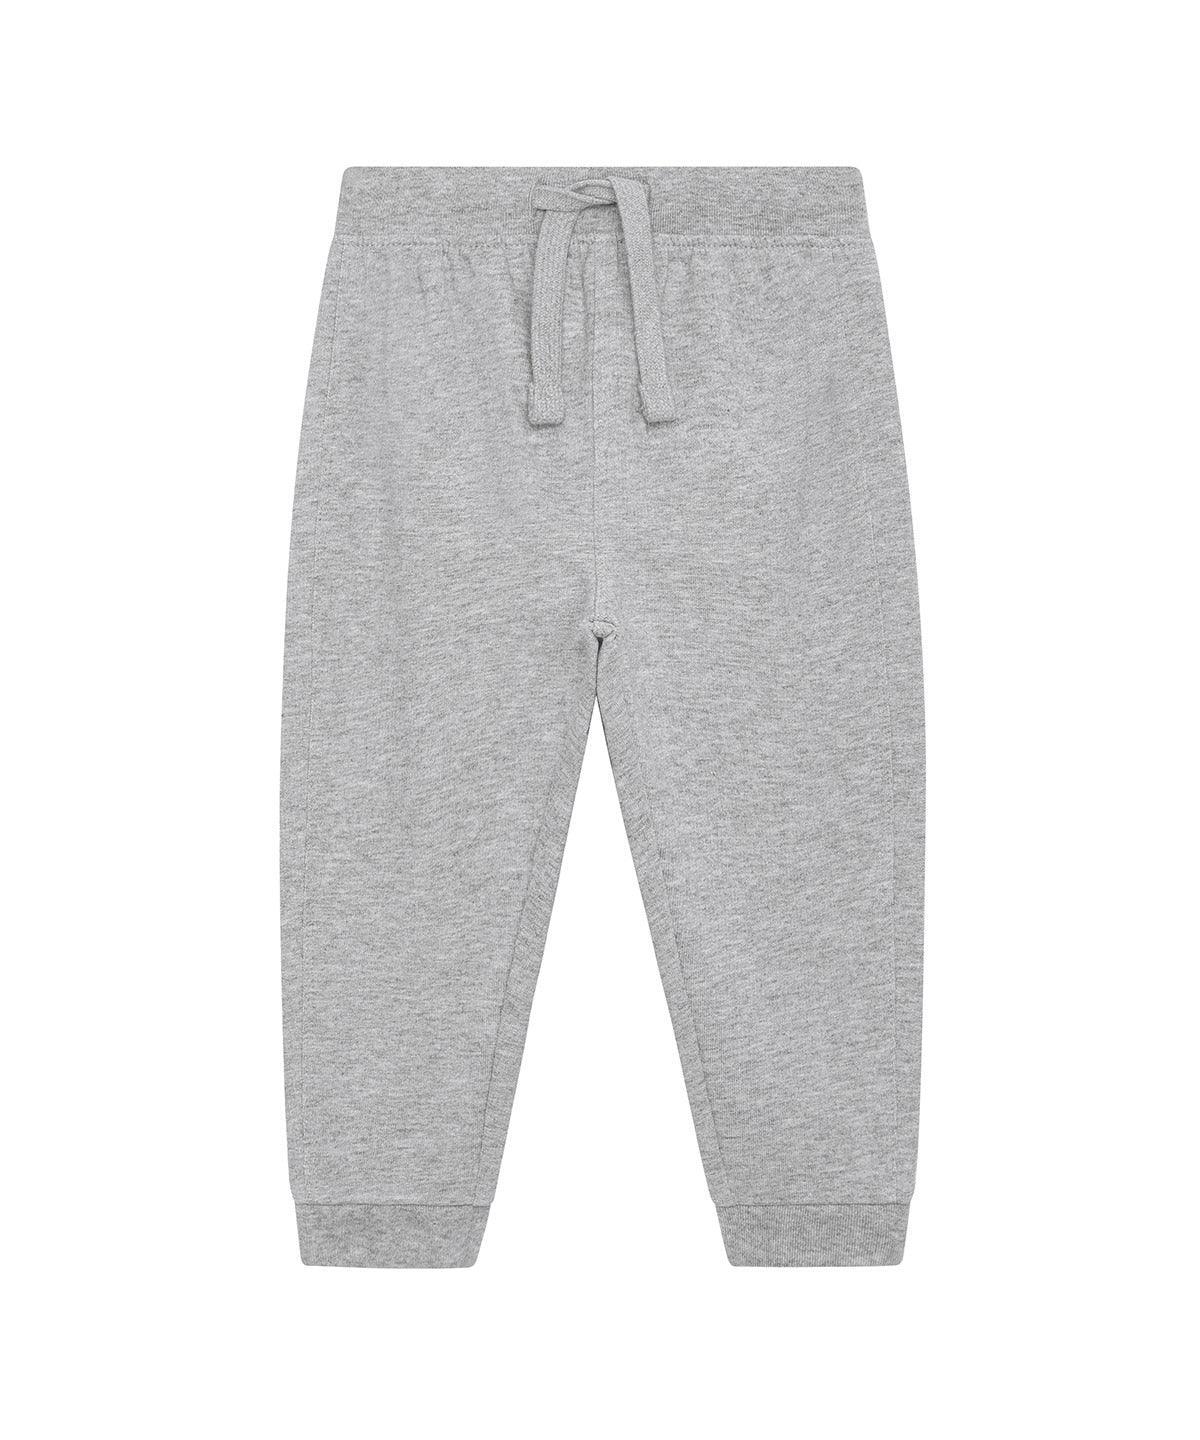 Heather Grey - Baby Shaker terry jog pants (STBB921) Sweatpants Stanley/Stella Baby & Toddler, Exclusives, Home Comforts, Joggers, New Colours for 2023, New Styles For 2022, Organic & Conscious, Stanley/ Stella Schoolwear Centres